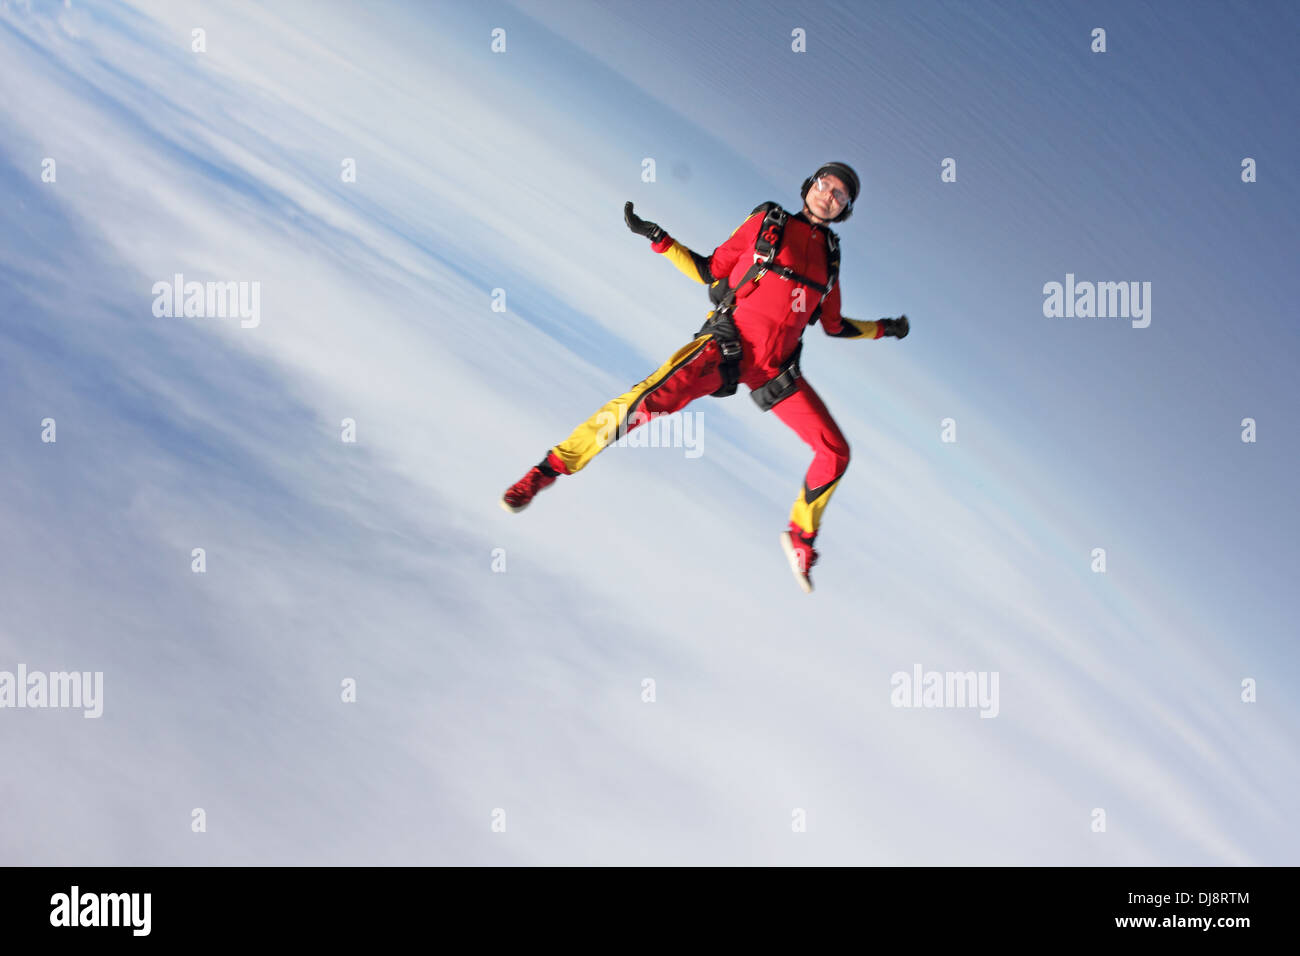 This skydiver woman is falling free in a head down position over the blue sky. She is tracking downwards with over 130 MPH. Stock Photo